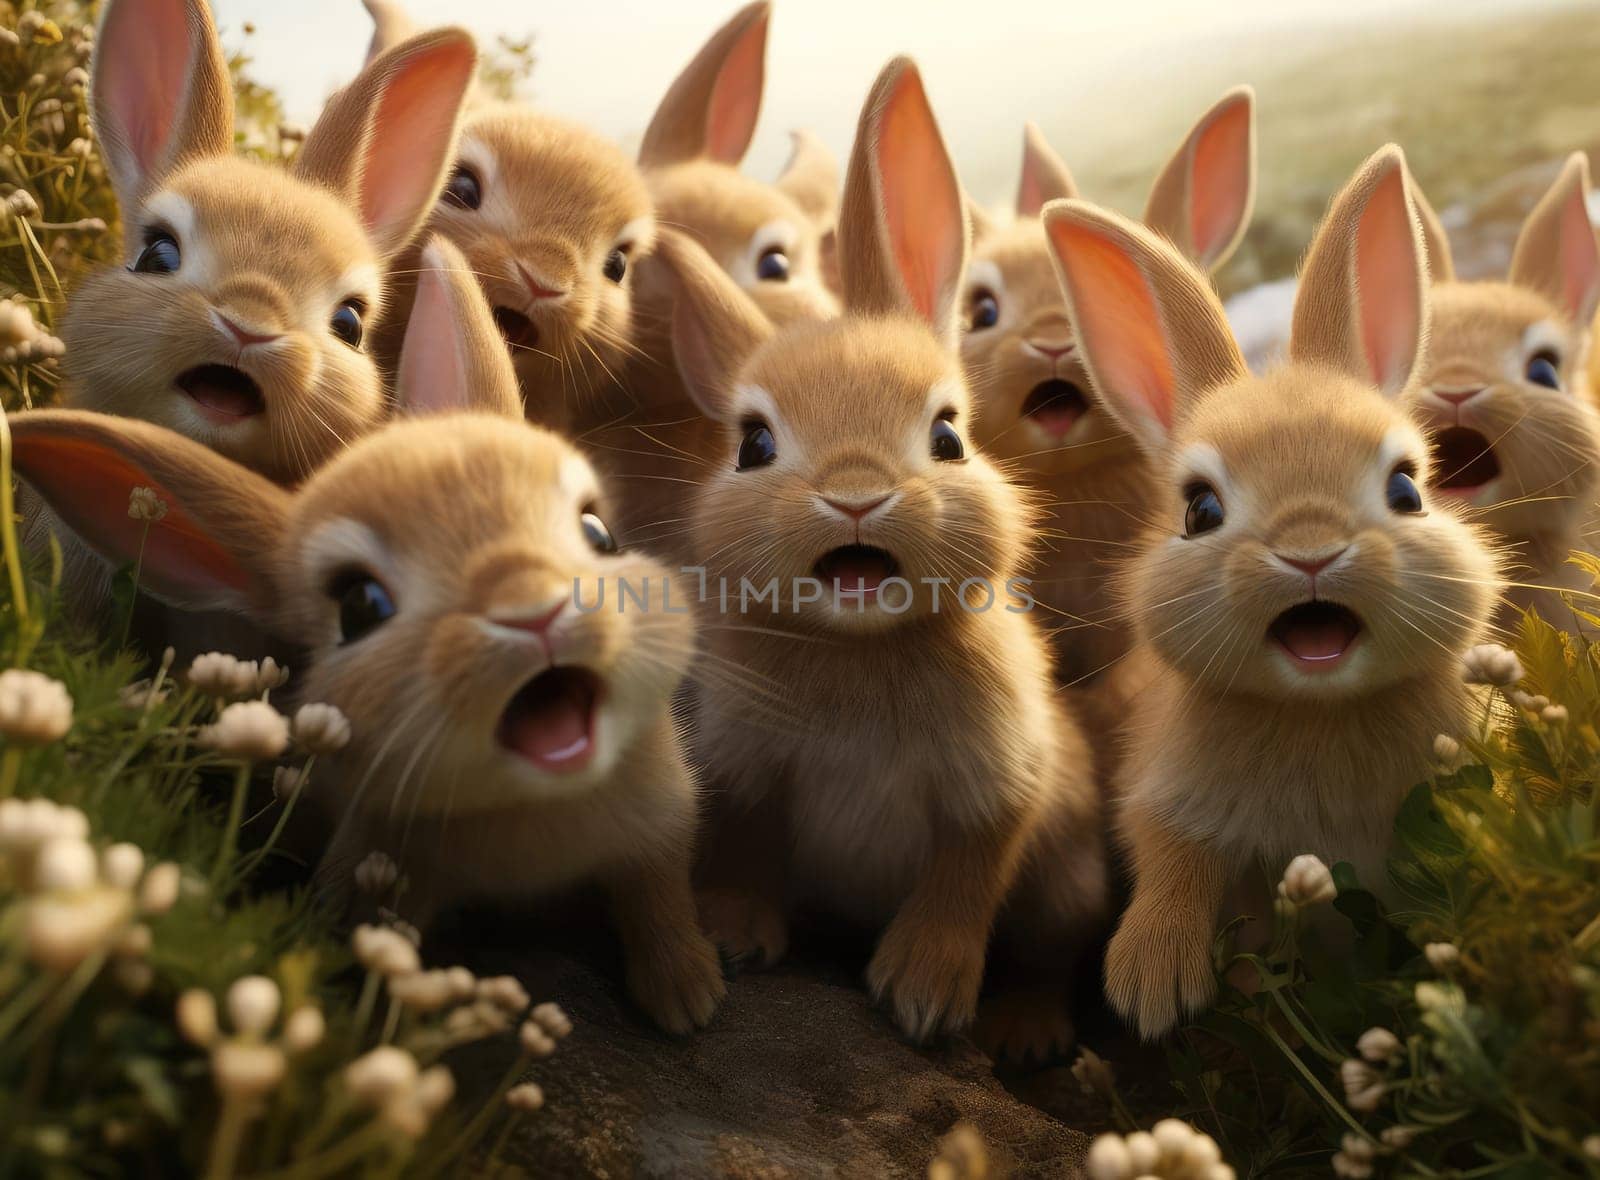 Several rabbits take a group selfie. Everyone is looking at the camera